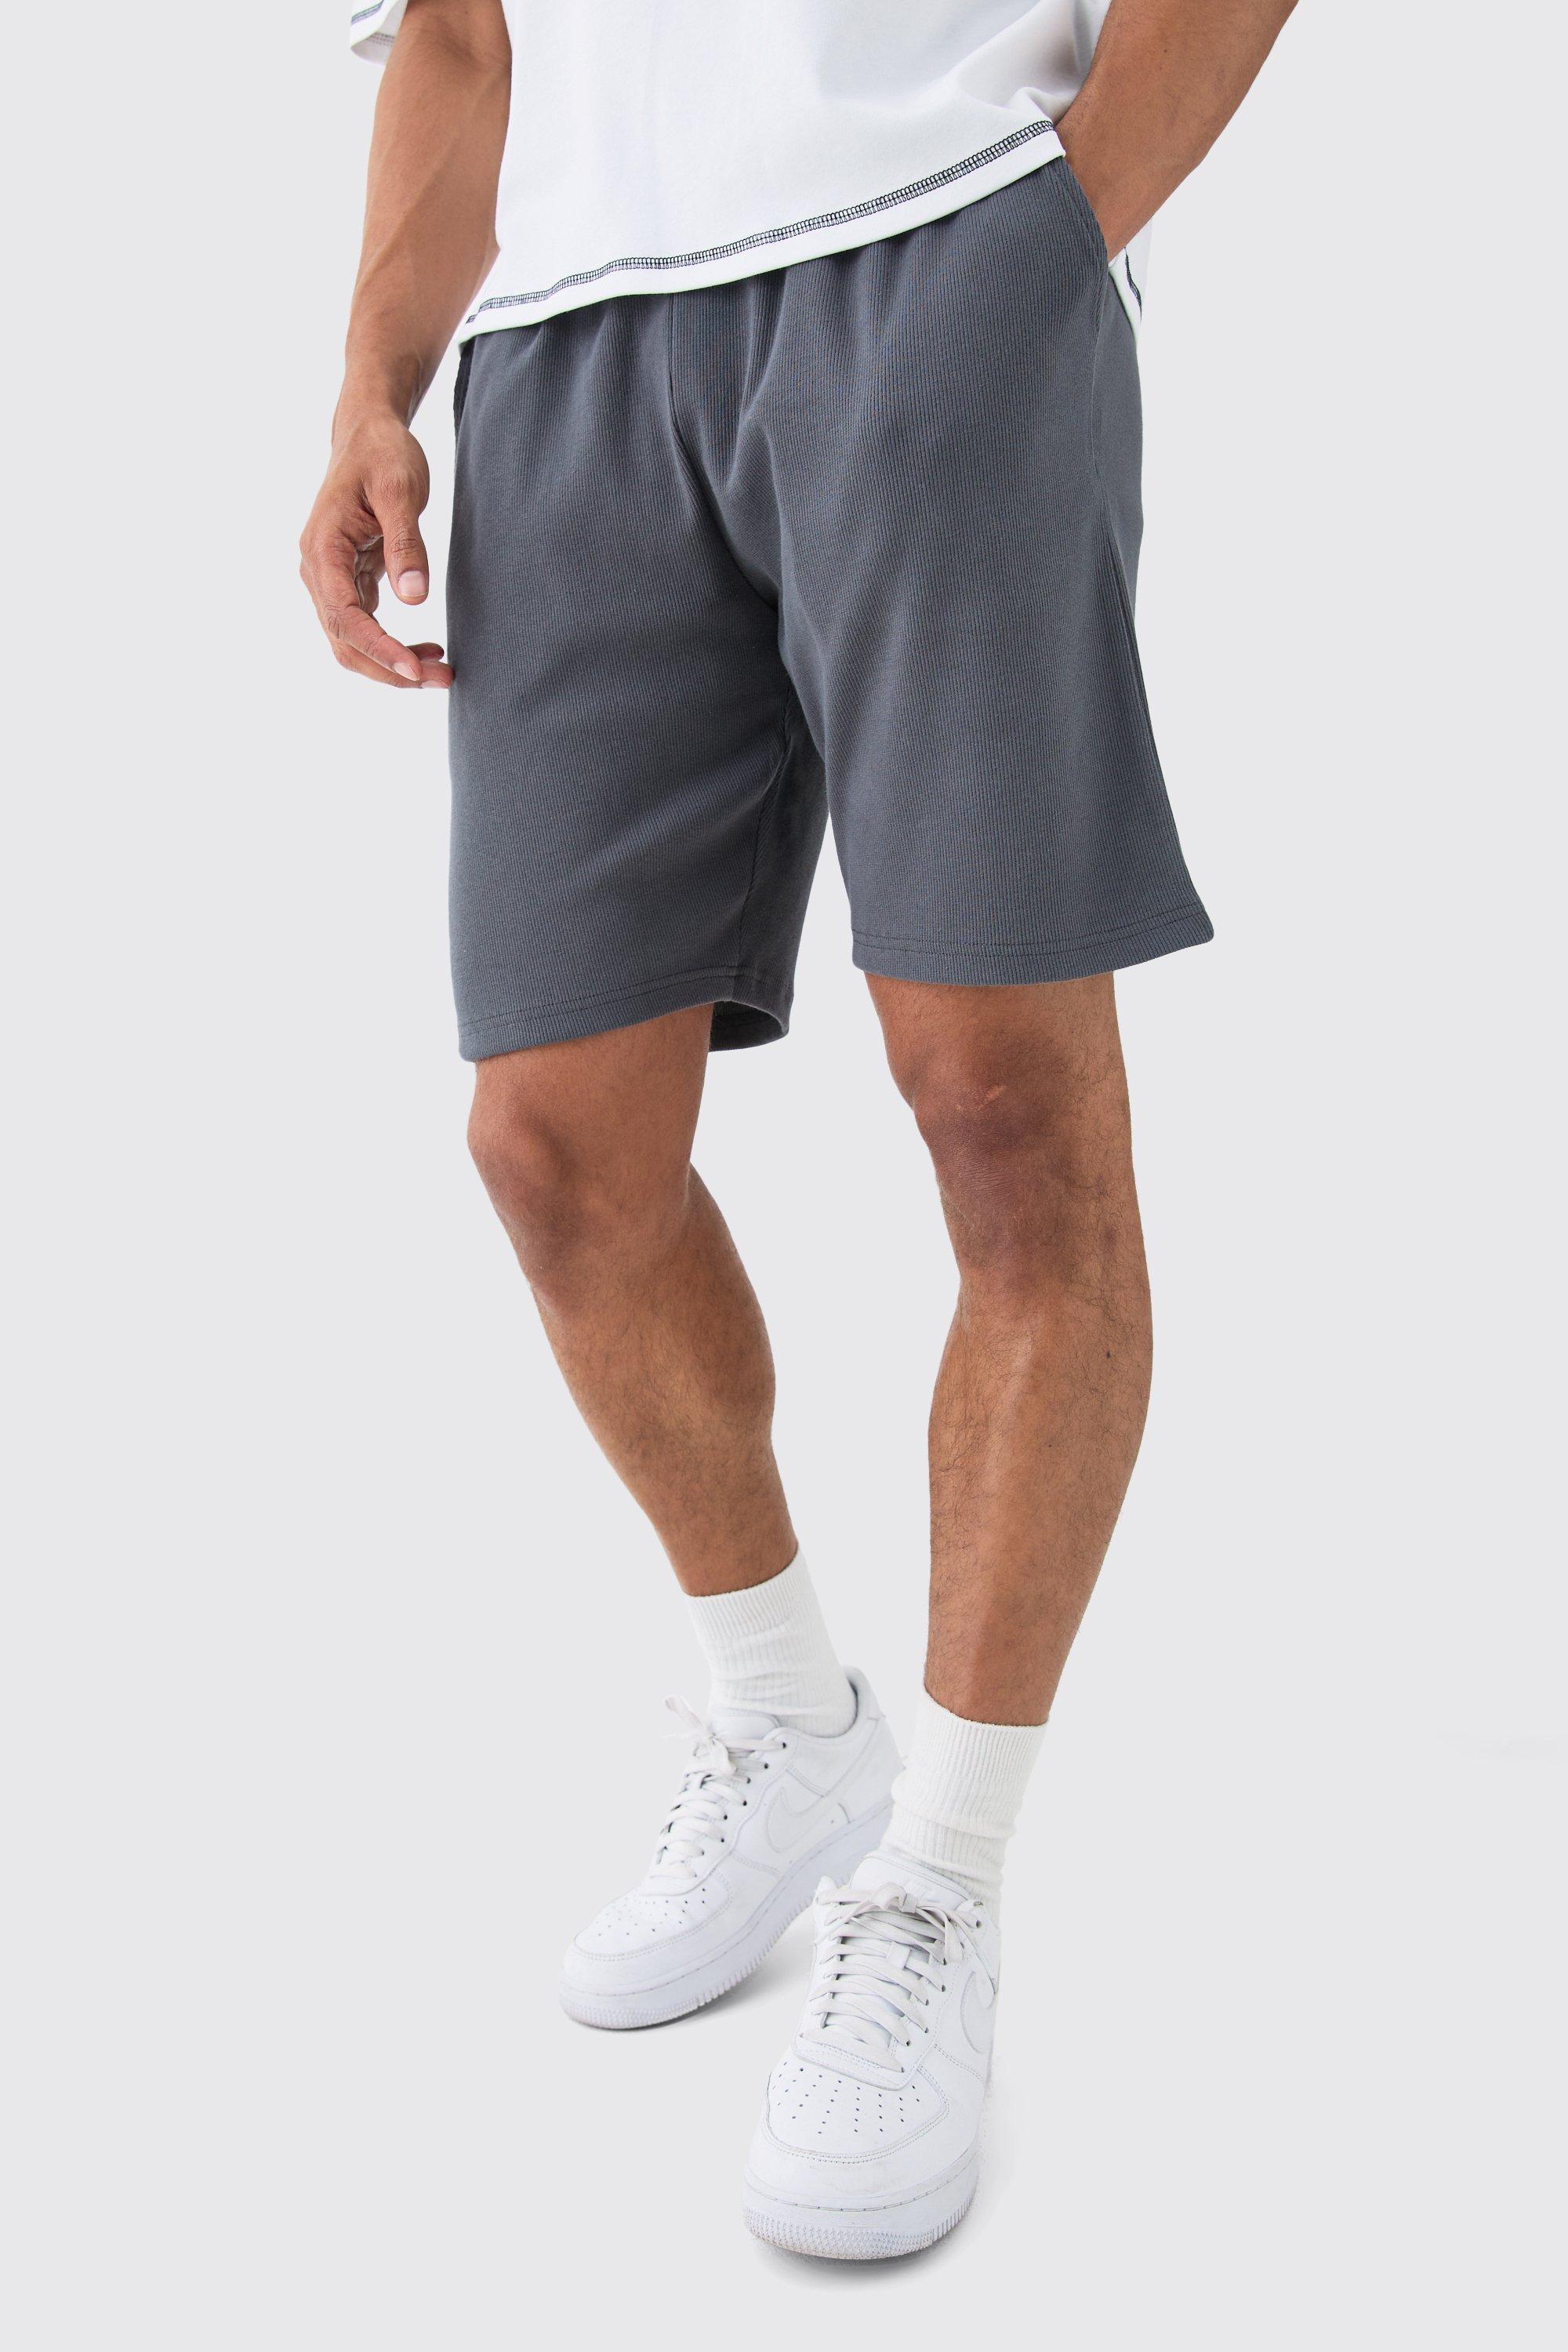 Image of Loose Fit Mid Length Heavyweight Ribbed Shorts, Grigio